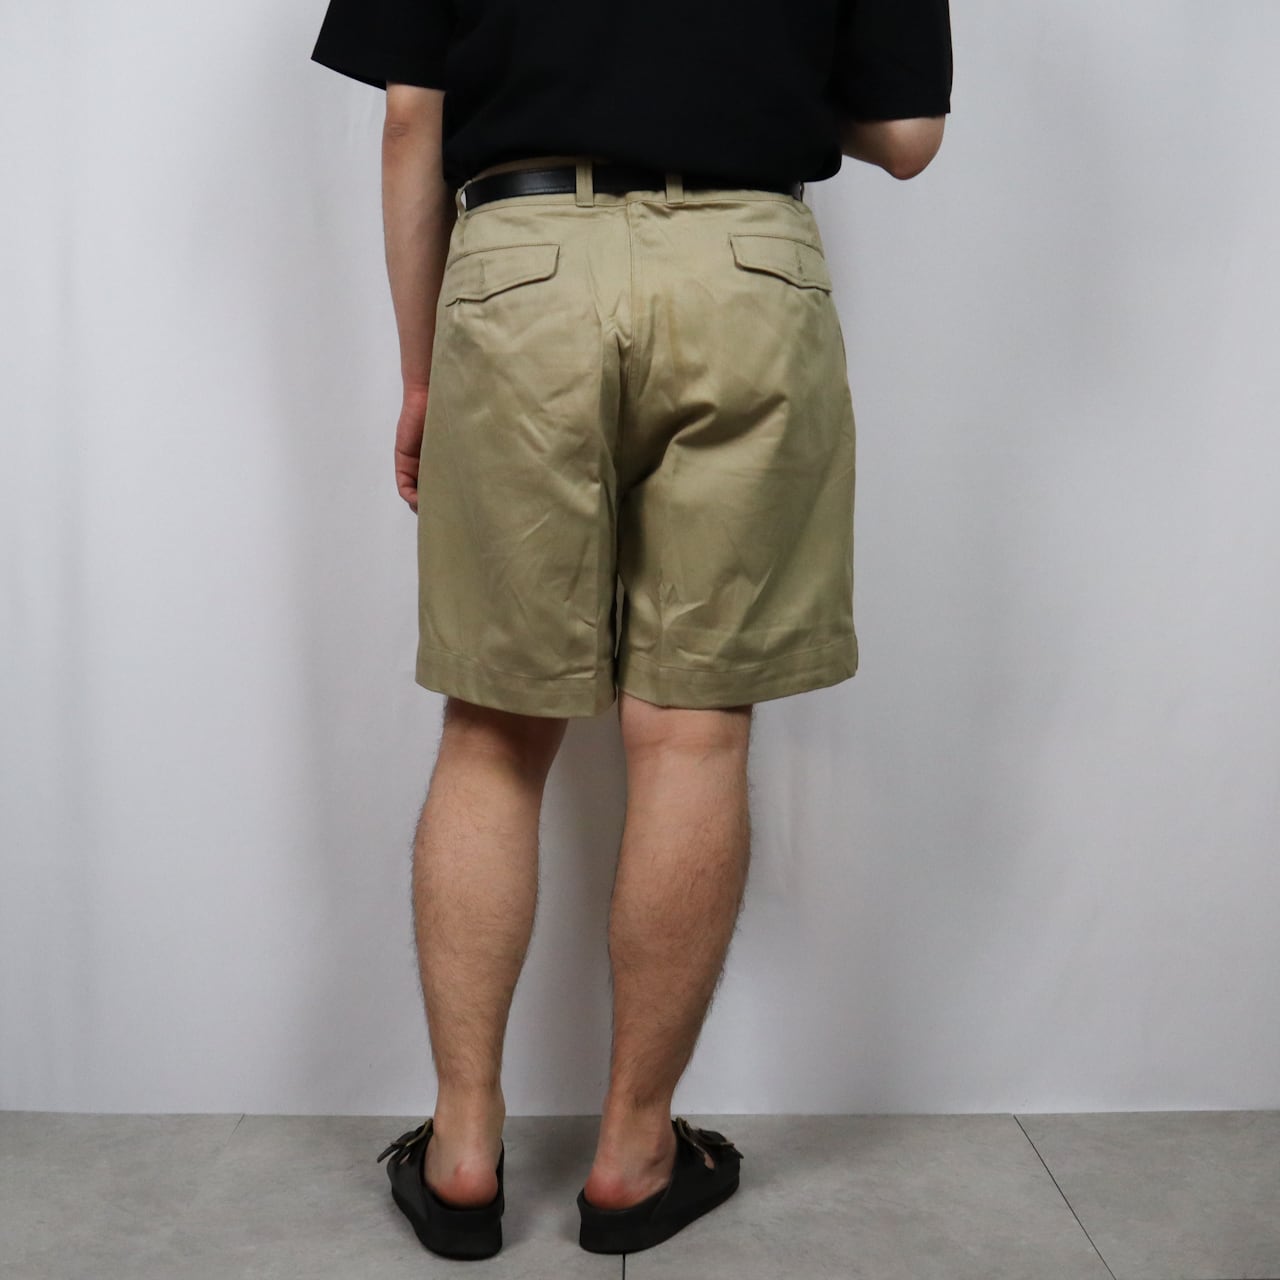 DEADSTOCK】FRENCH ARMY M-52 CHINO SHORTS フランス軍 2タック チノ